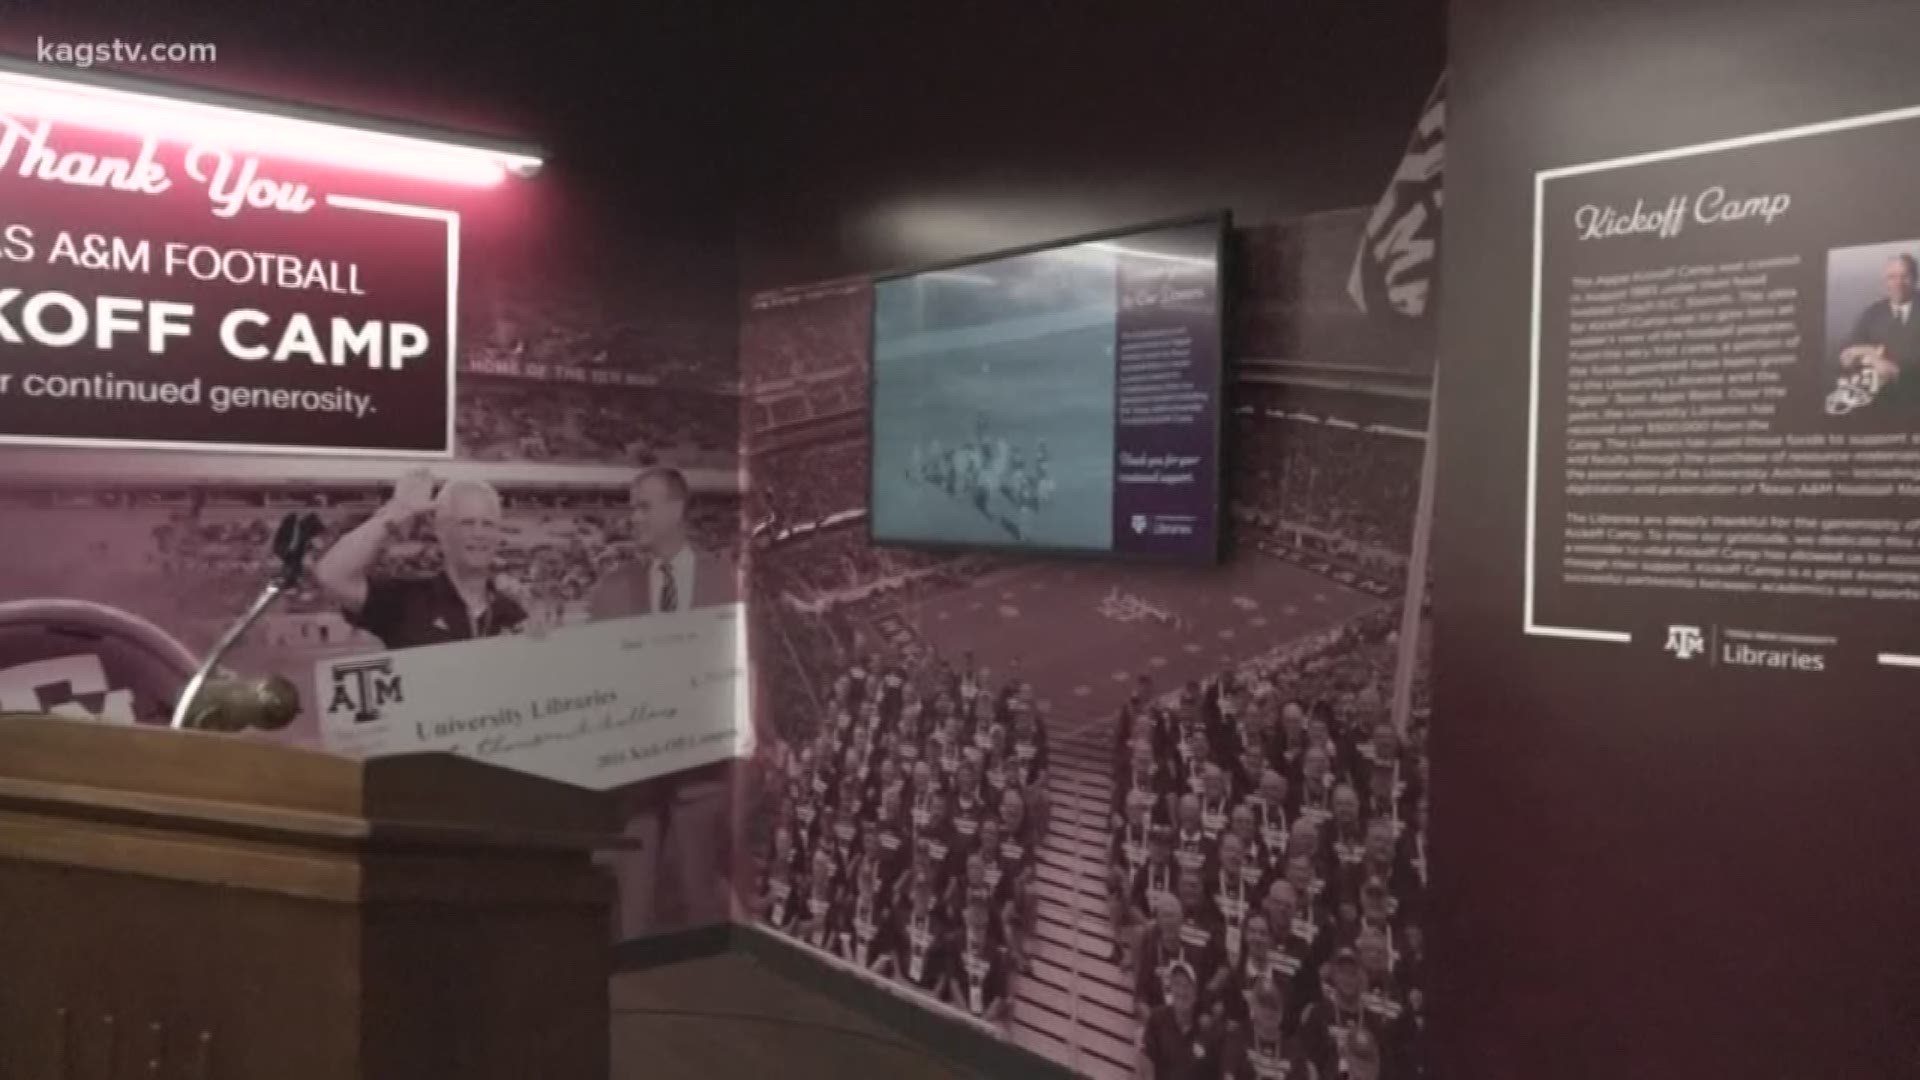 A&M University libraries dedicated a wall in the annex to honor contributions the Texas A&M football Kick-Off camp has made to the libraries.